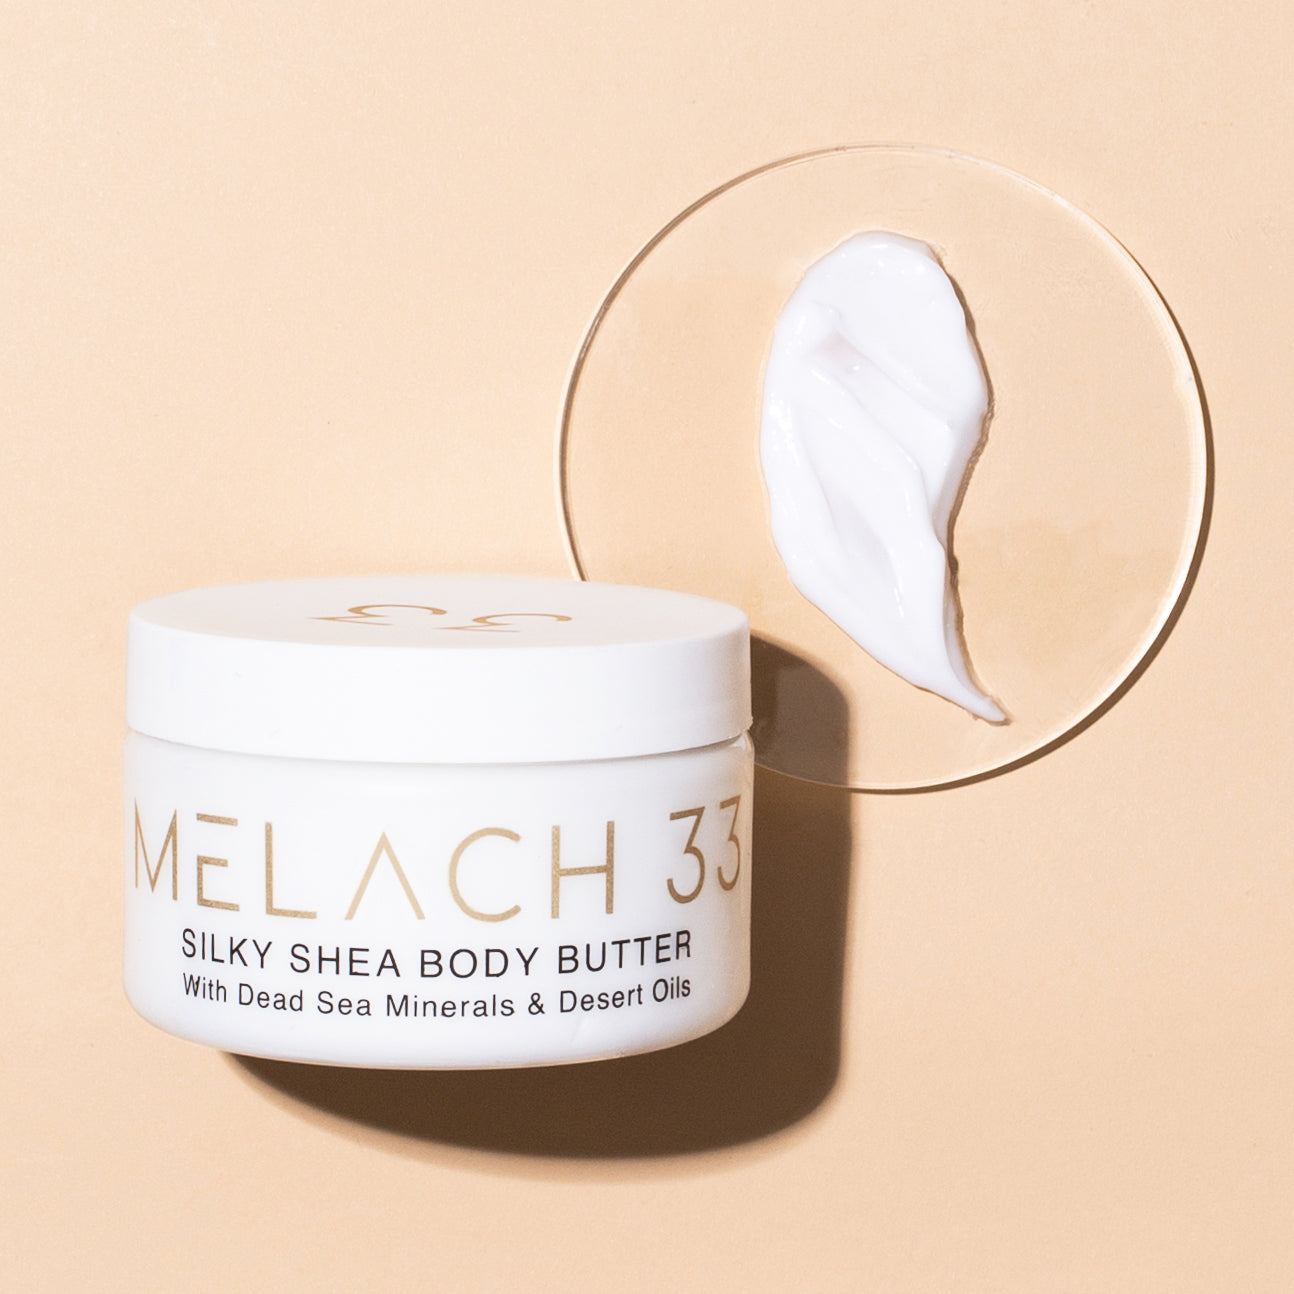 Body Butter Duo for $110 –